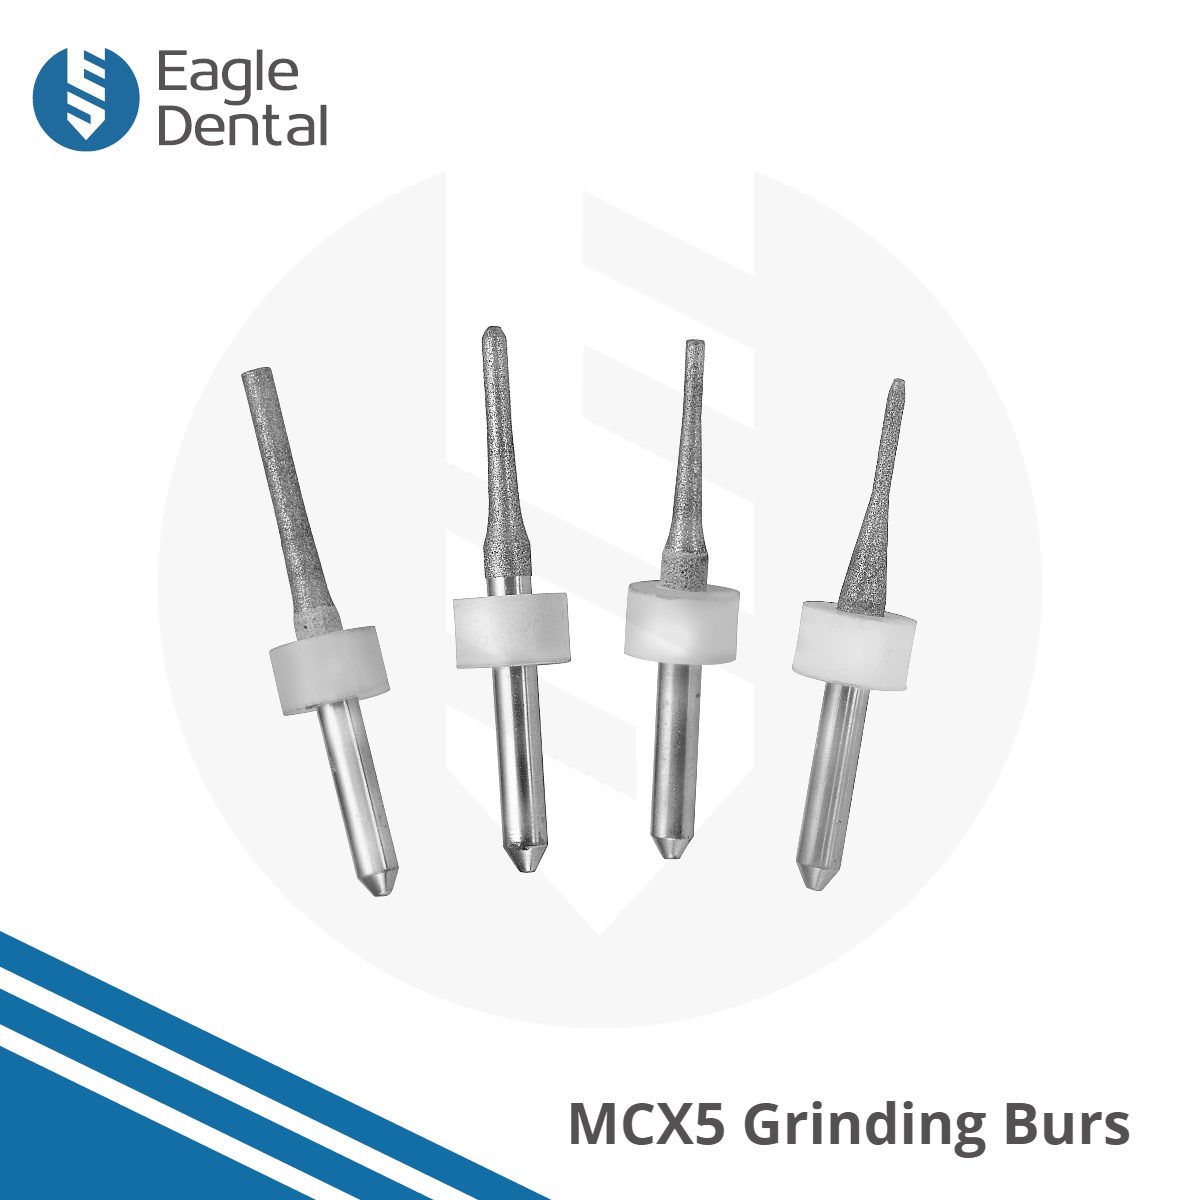 MCX5 burs: emax and glass